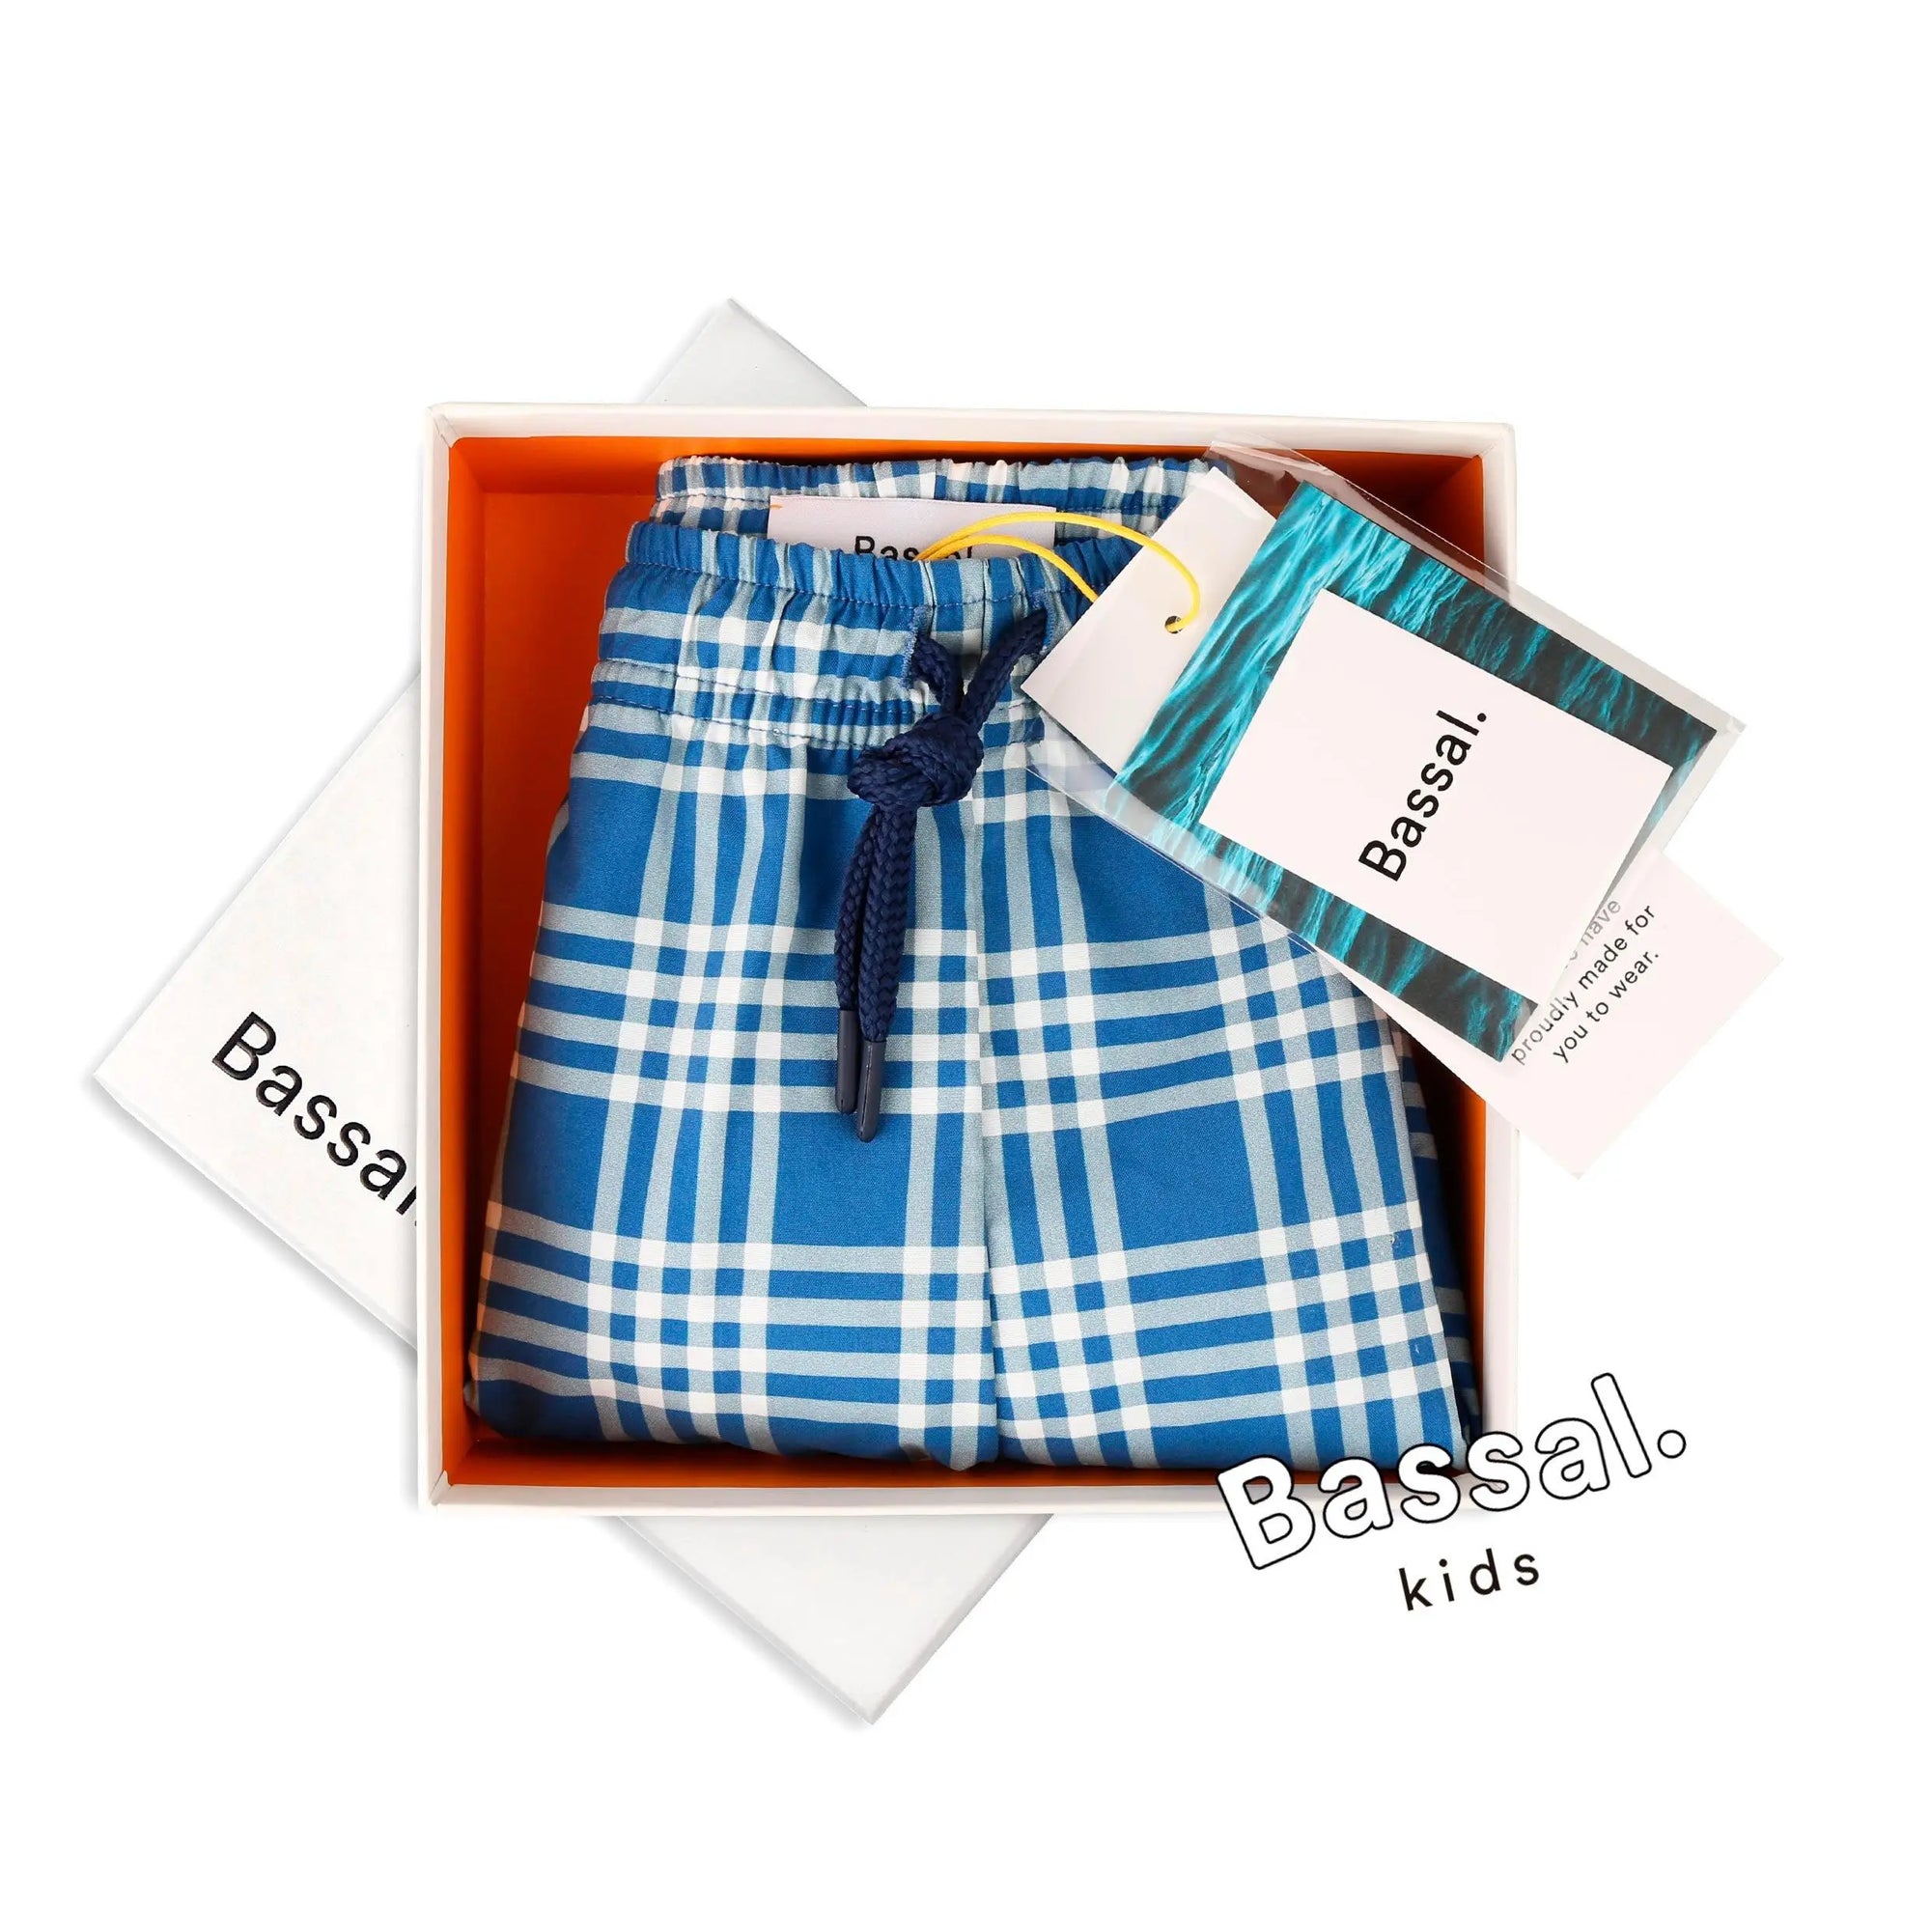 A neatly folded pair of blue and white plaid Cuatro Kids Swimwear with a navy blue drawstring is displayed inside an orange-bordered gift box. The box lid, featuring the brand name "Bassal." from the popular Bassalstore in Barcelona, is partially visible on the side. A tag with "Bassal. kids" is attached to the swimwear.